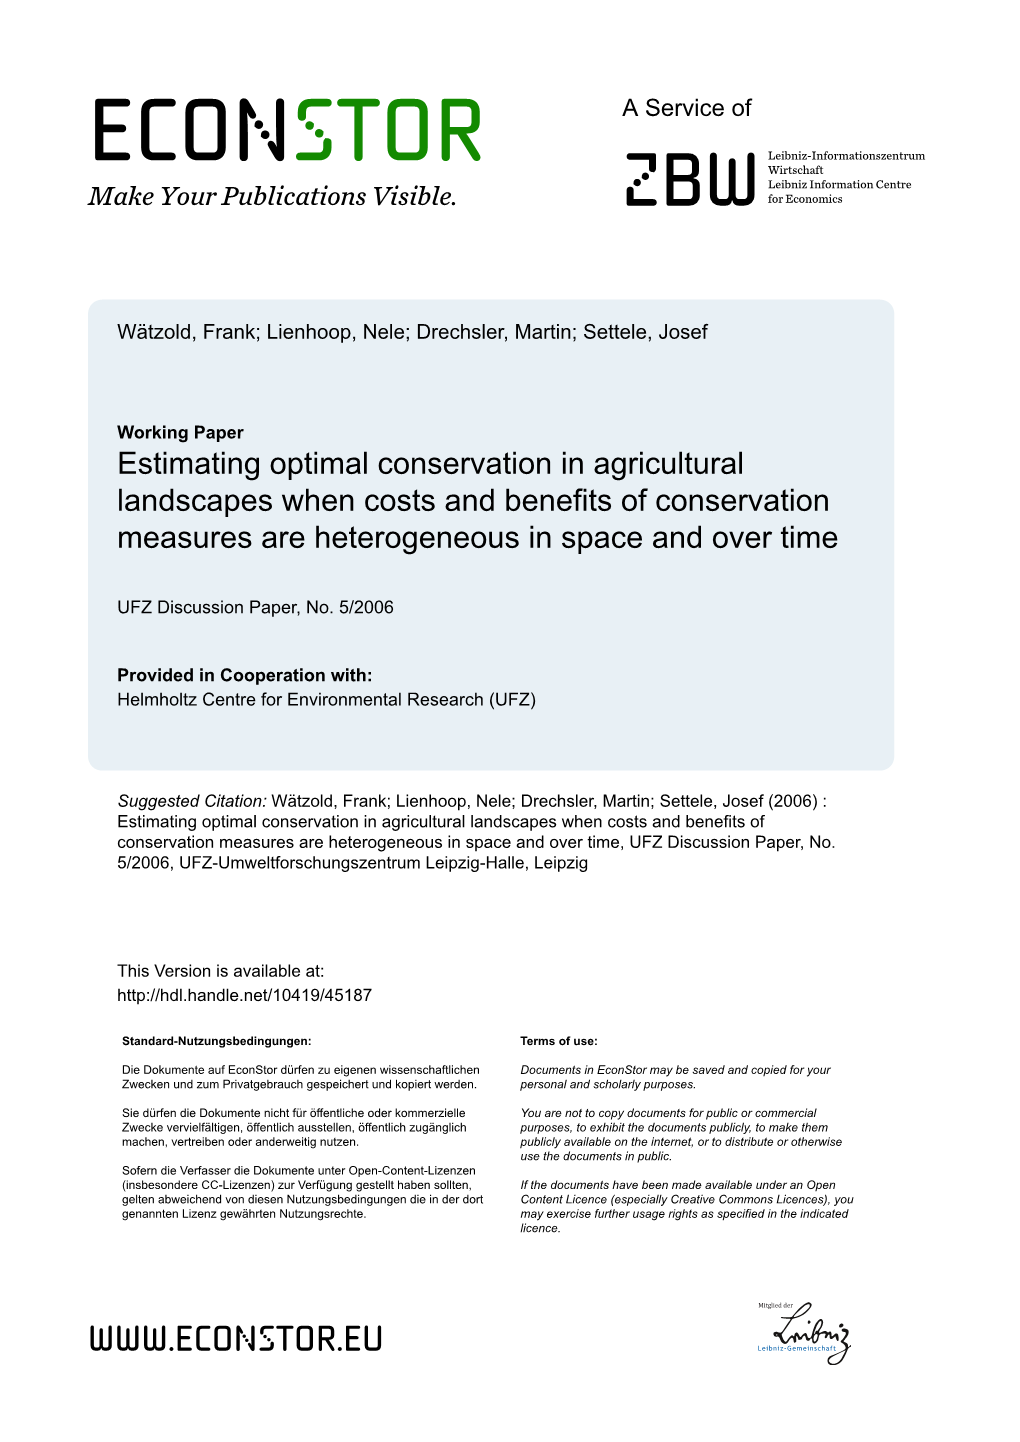 Estimating Optimal Conservation in Agricultural Landscapes When Costs and Benefits of Conservation Measures Are Heterogeneous in Space and Over Time